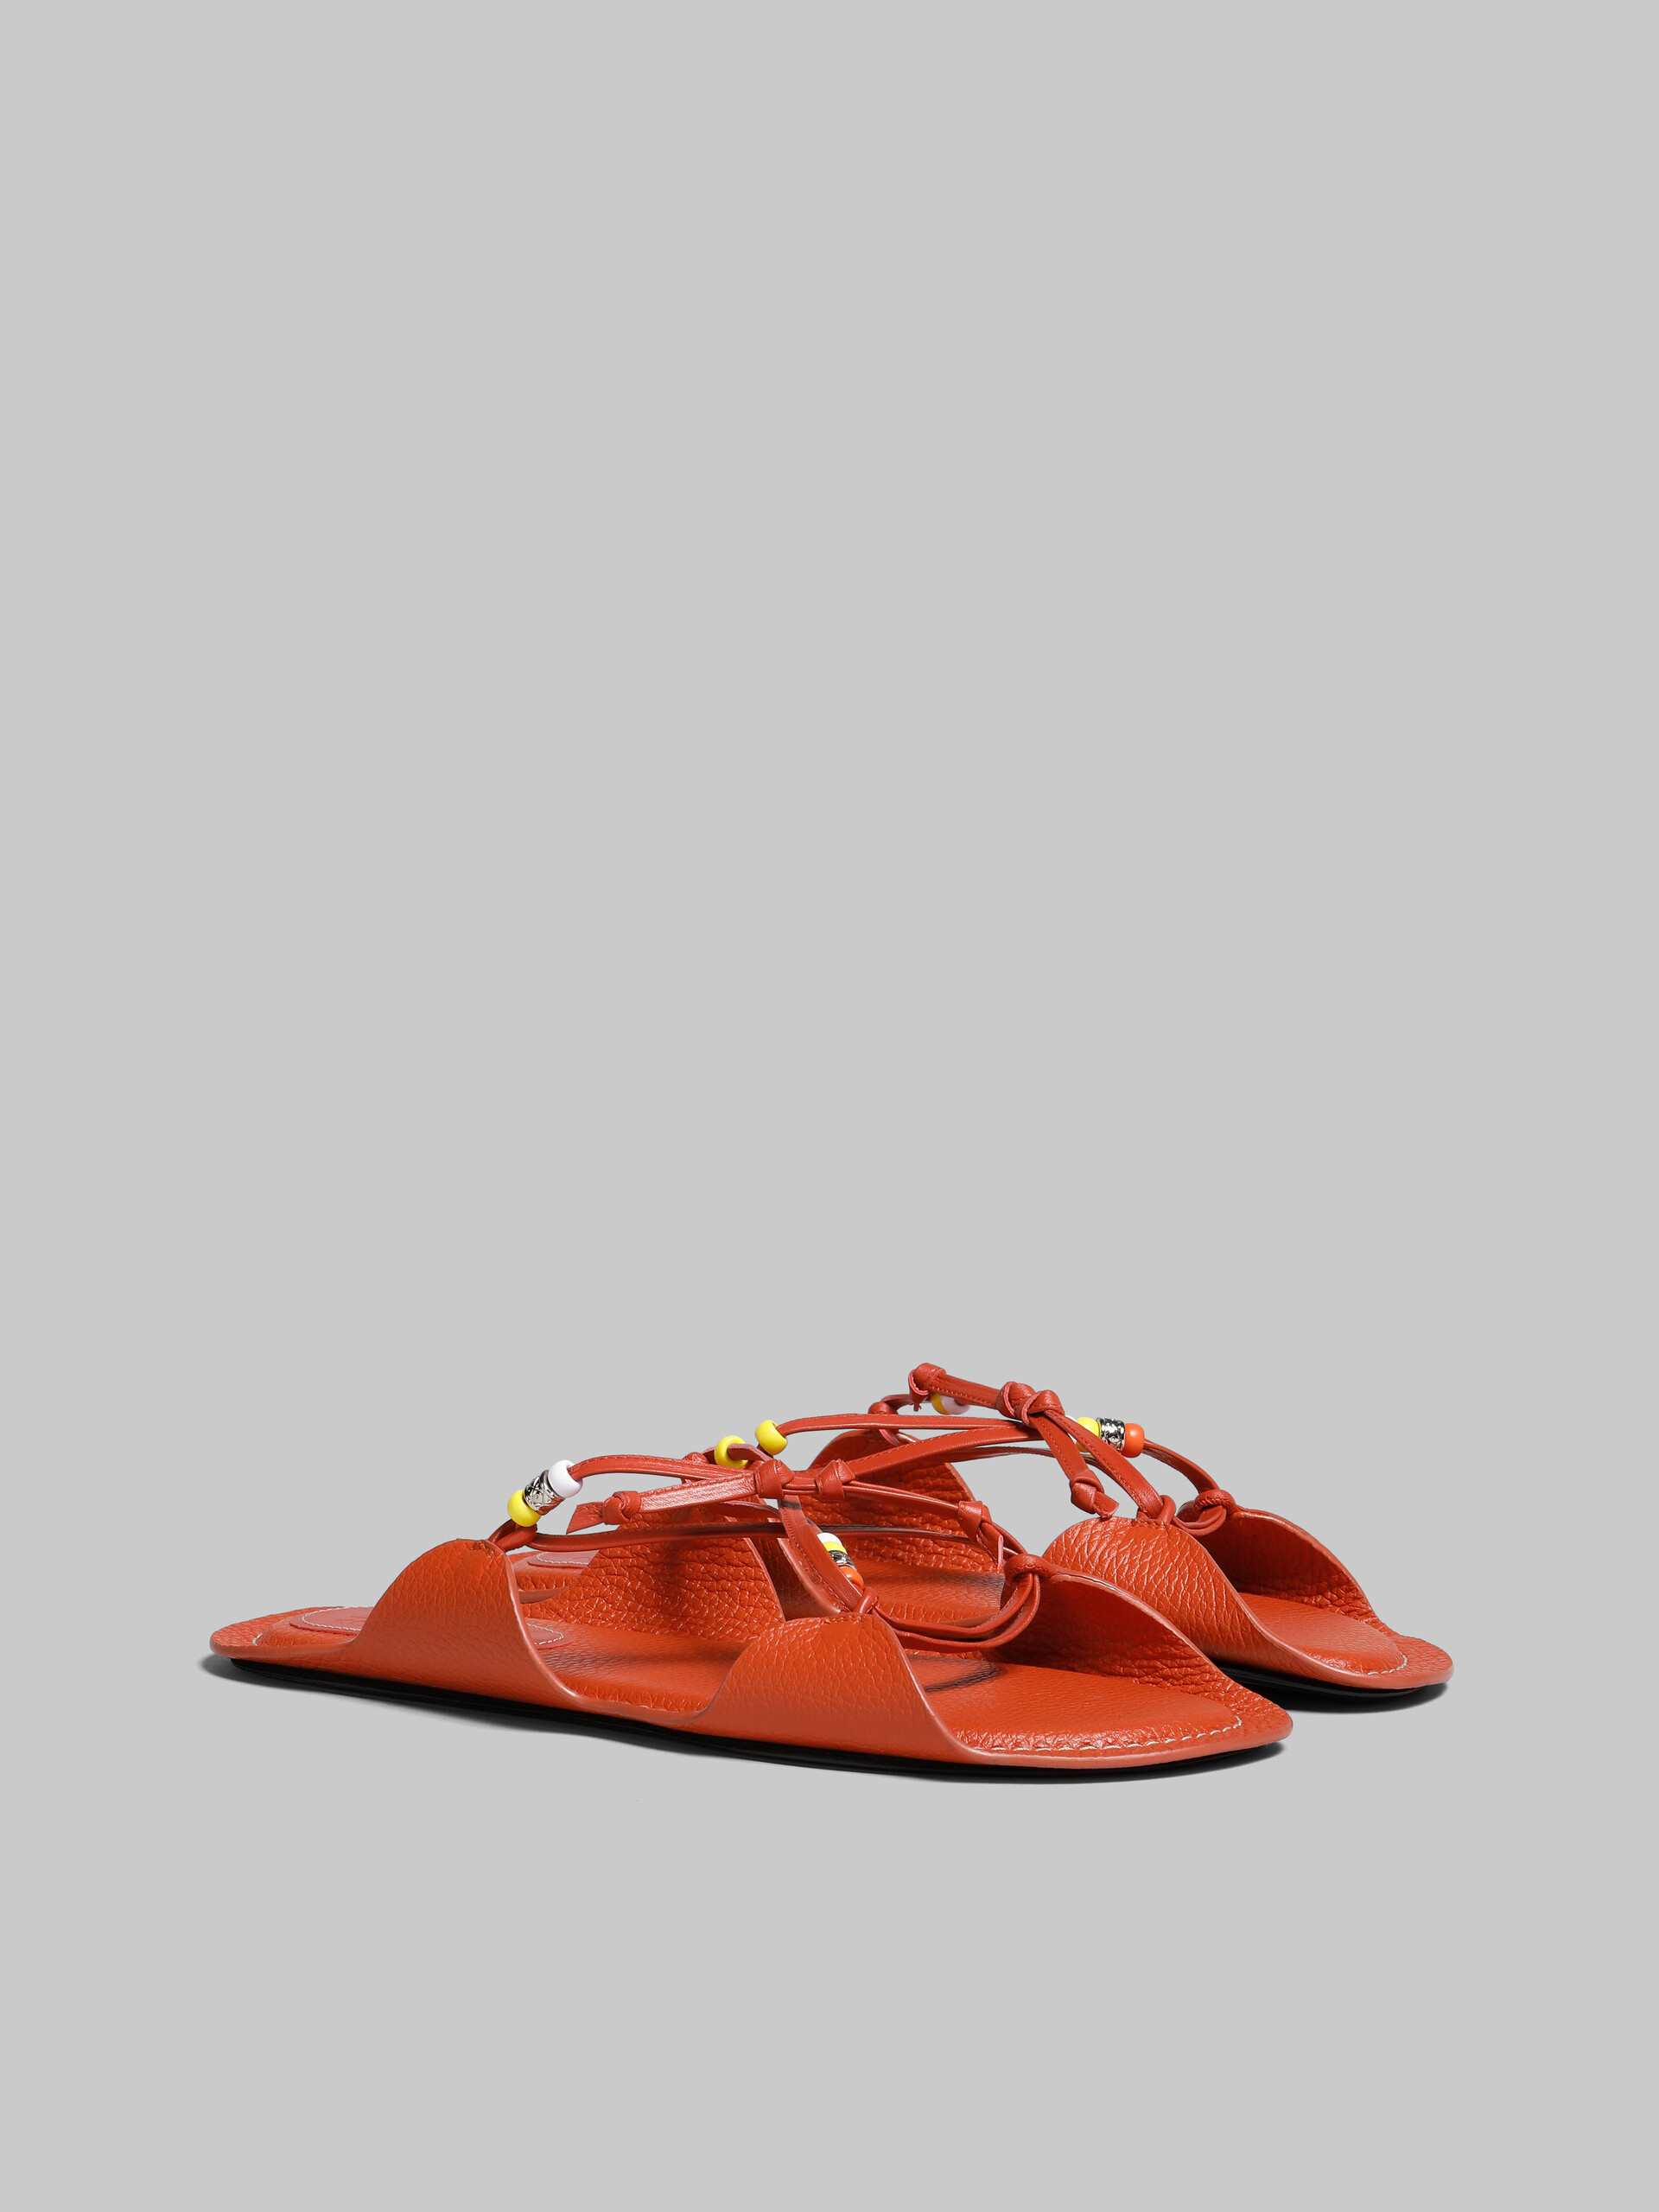 Marni x No Vacancy Inn - Brick red leather sandals with beads - Sandals - Image 2